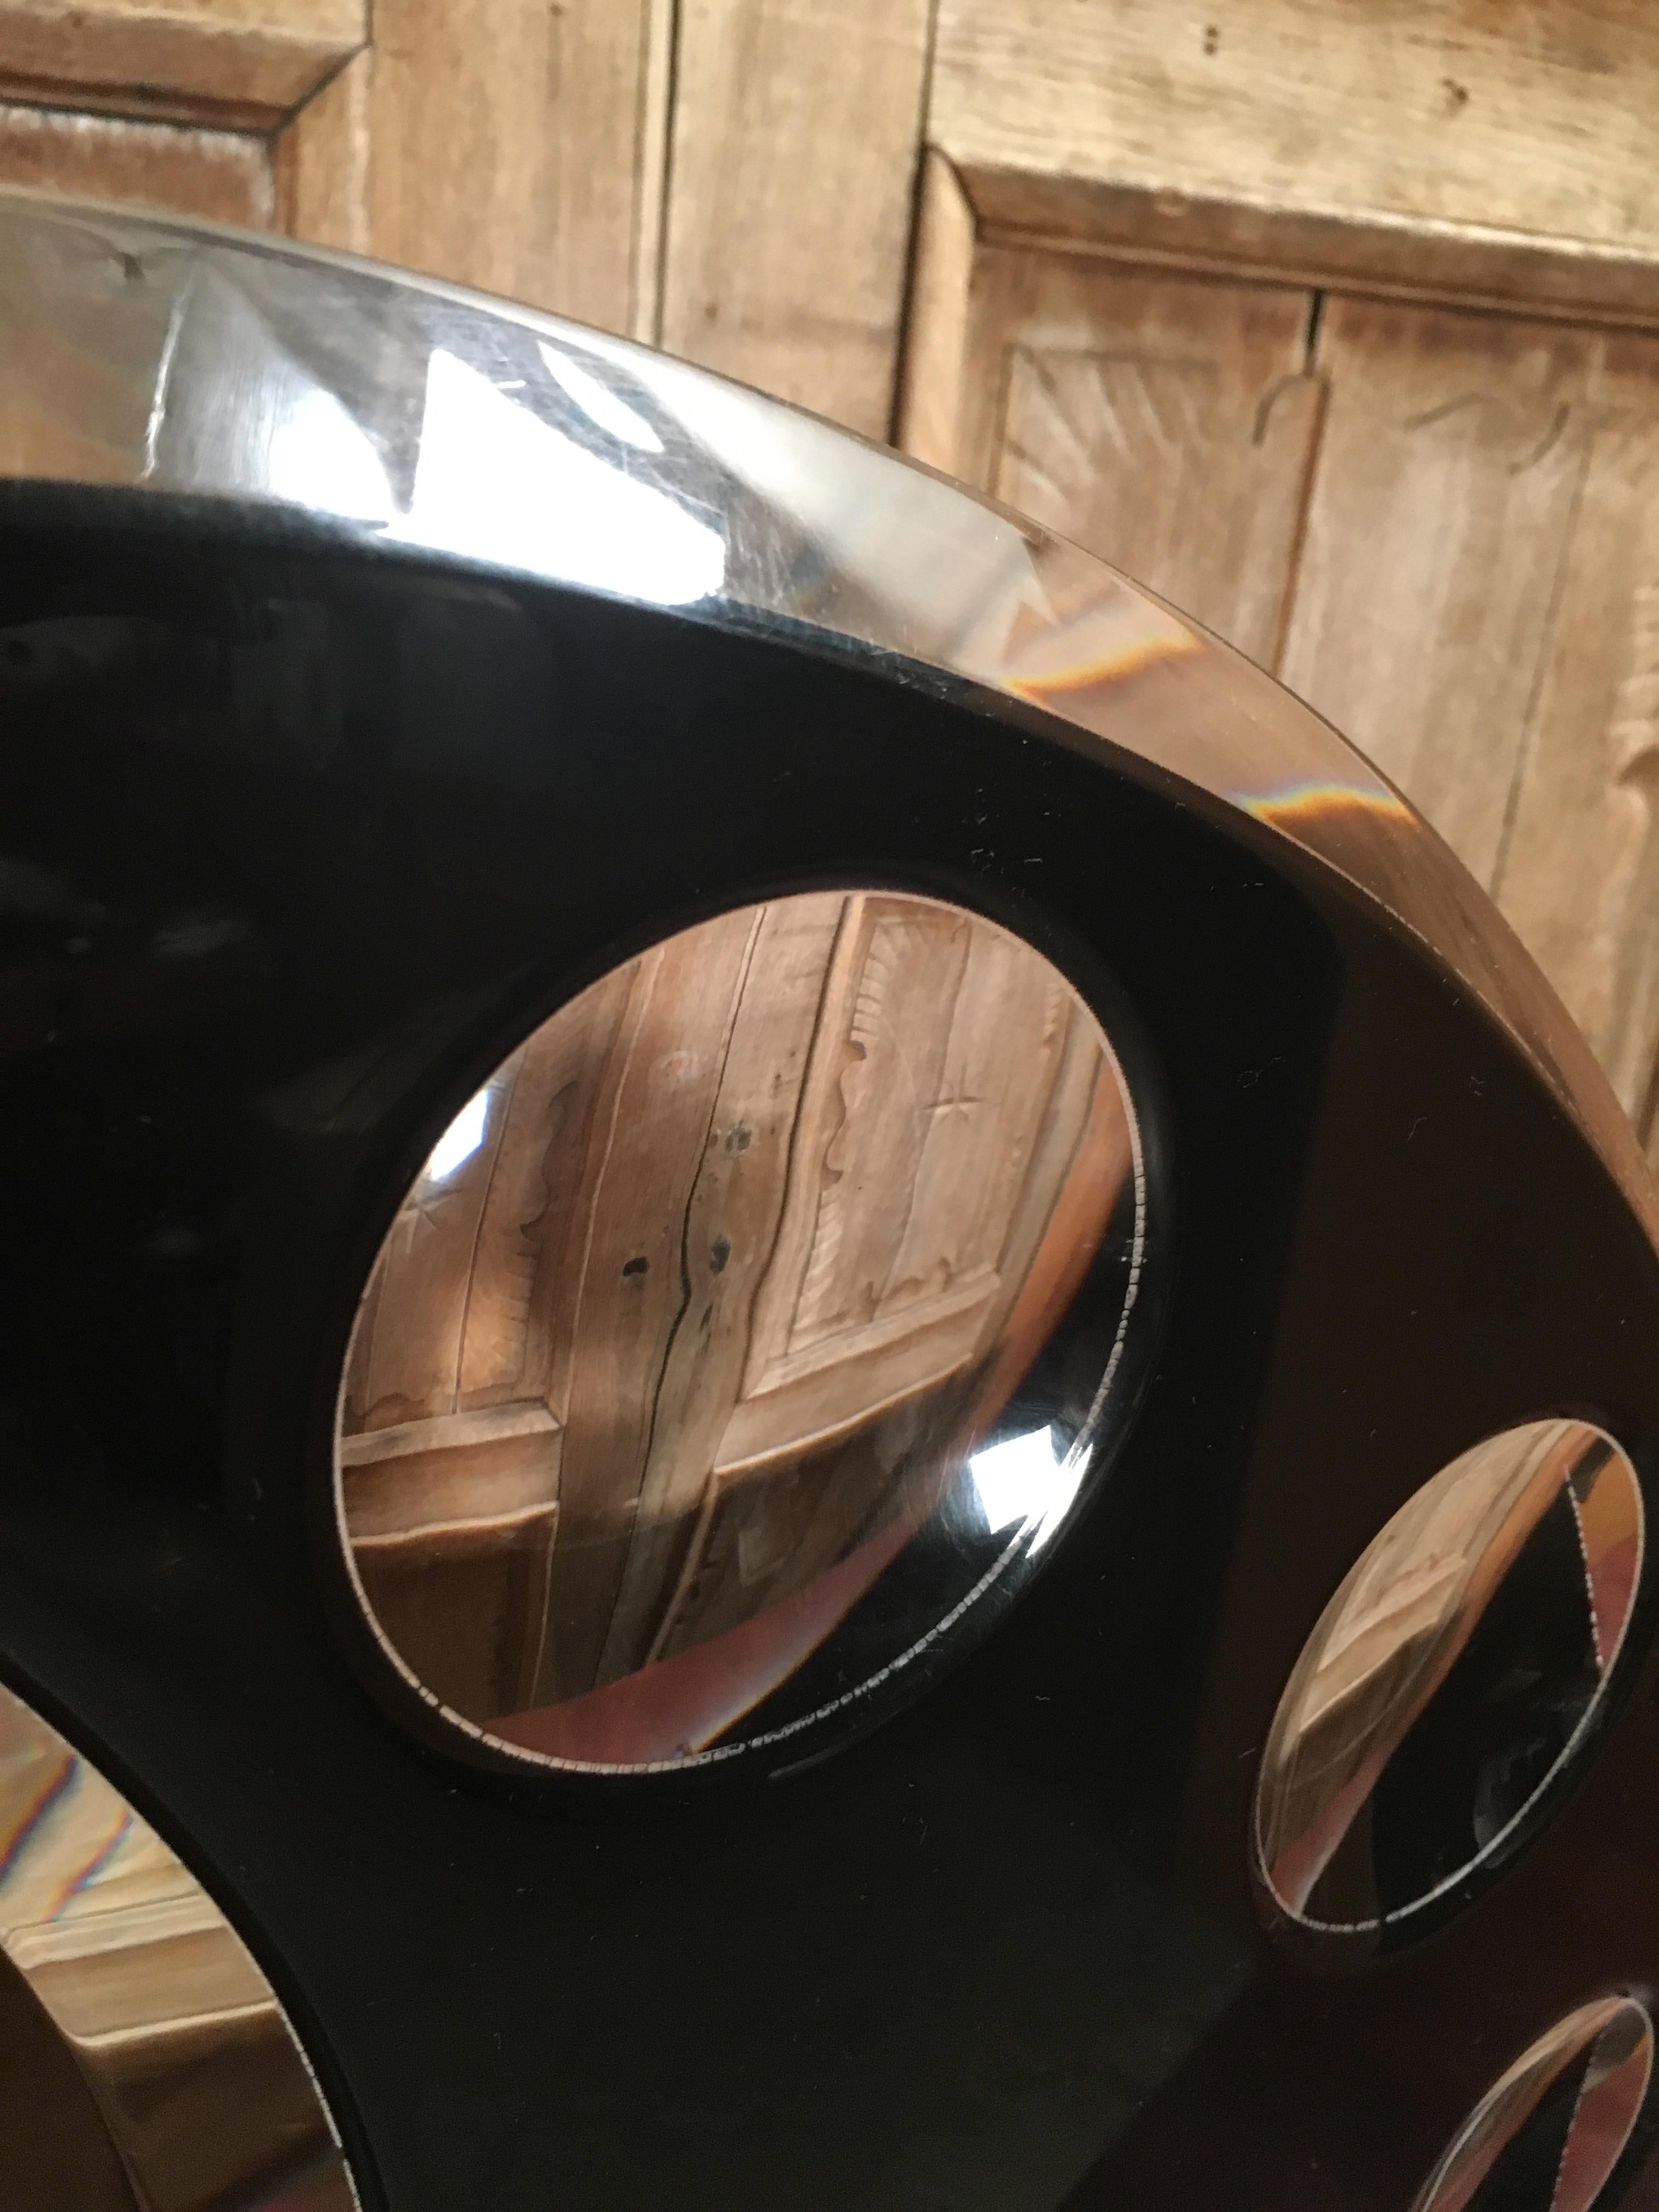 Lucite Crescent Moon Sculpture by Shlomi Haziza For Sale